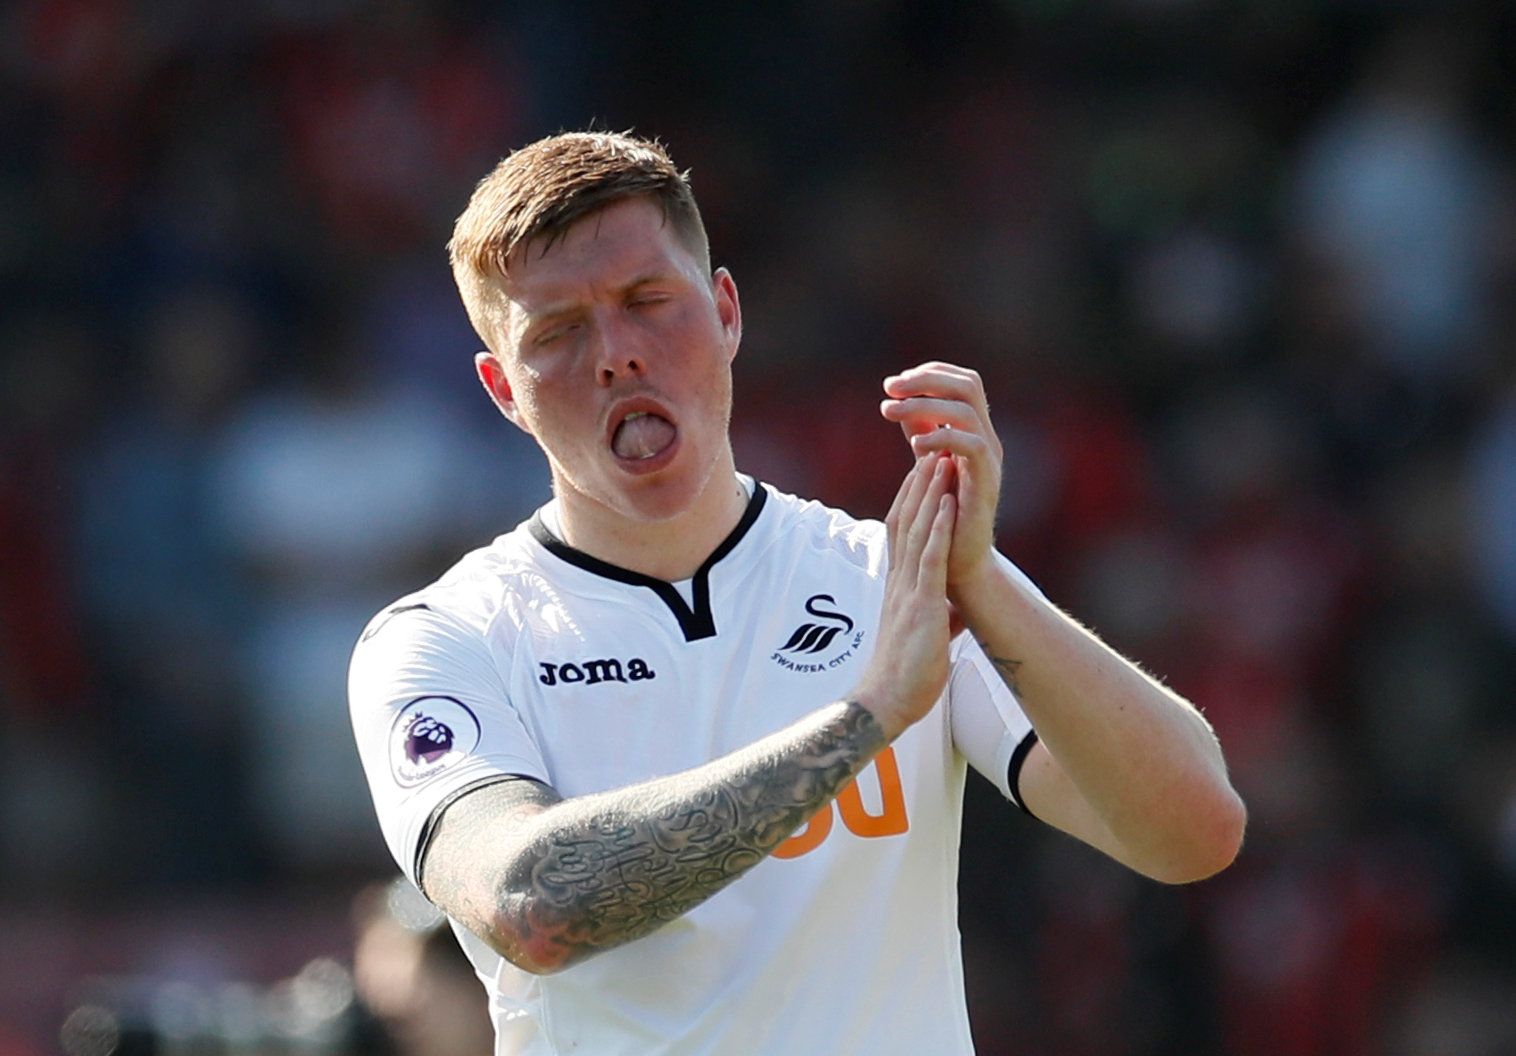 Soccer Football - Premier League - AFC Bournemouth vs Swansea City - Vitality Stadium, Bournemouth, Britain - May 5, 2018   Swansea City's Alfie Mawson looks dejected after the match               REUTERS/David Klein    EDITORIAL USE ONLY. No use with unauthorized audio, video, data, fixture lists, club/league logos or 